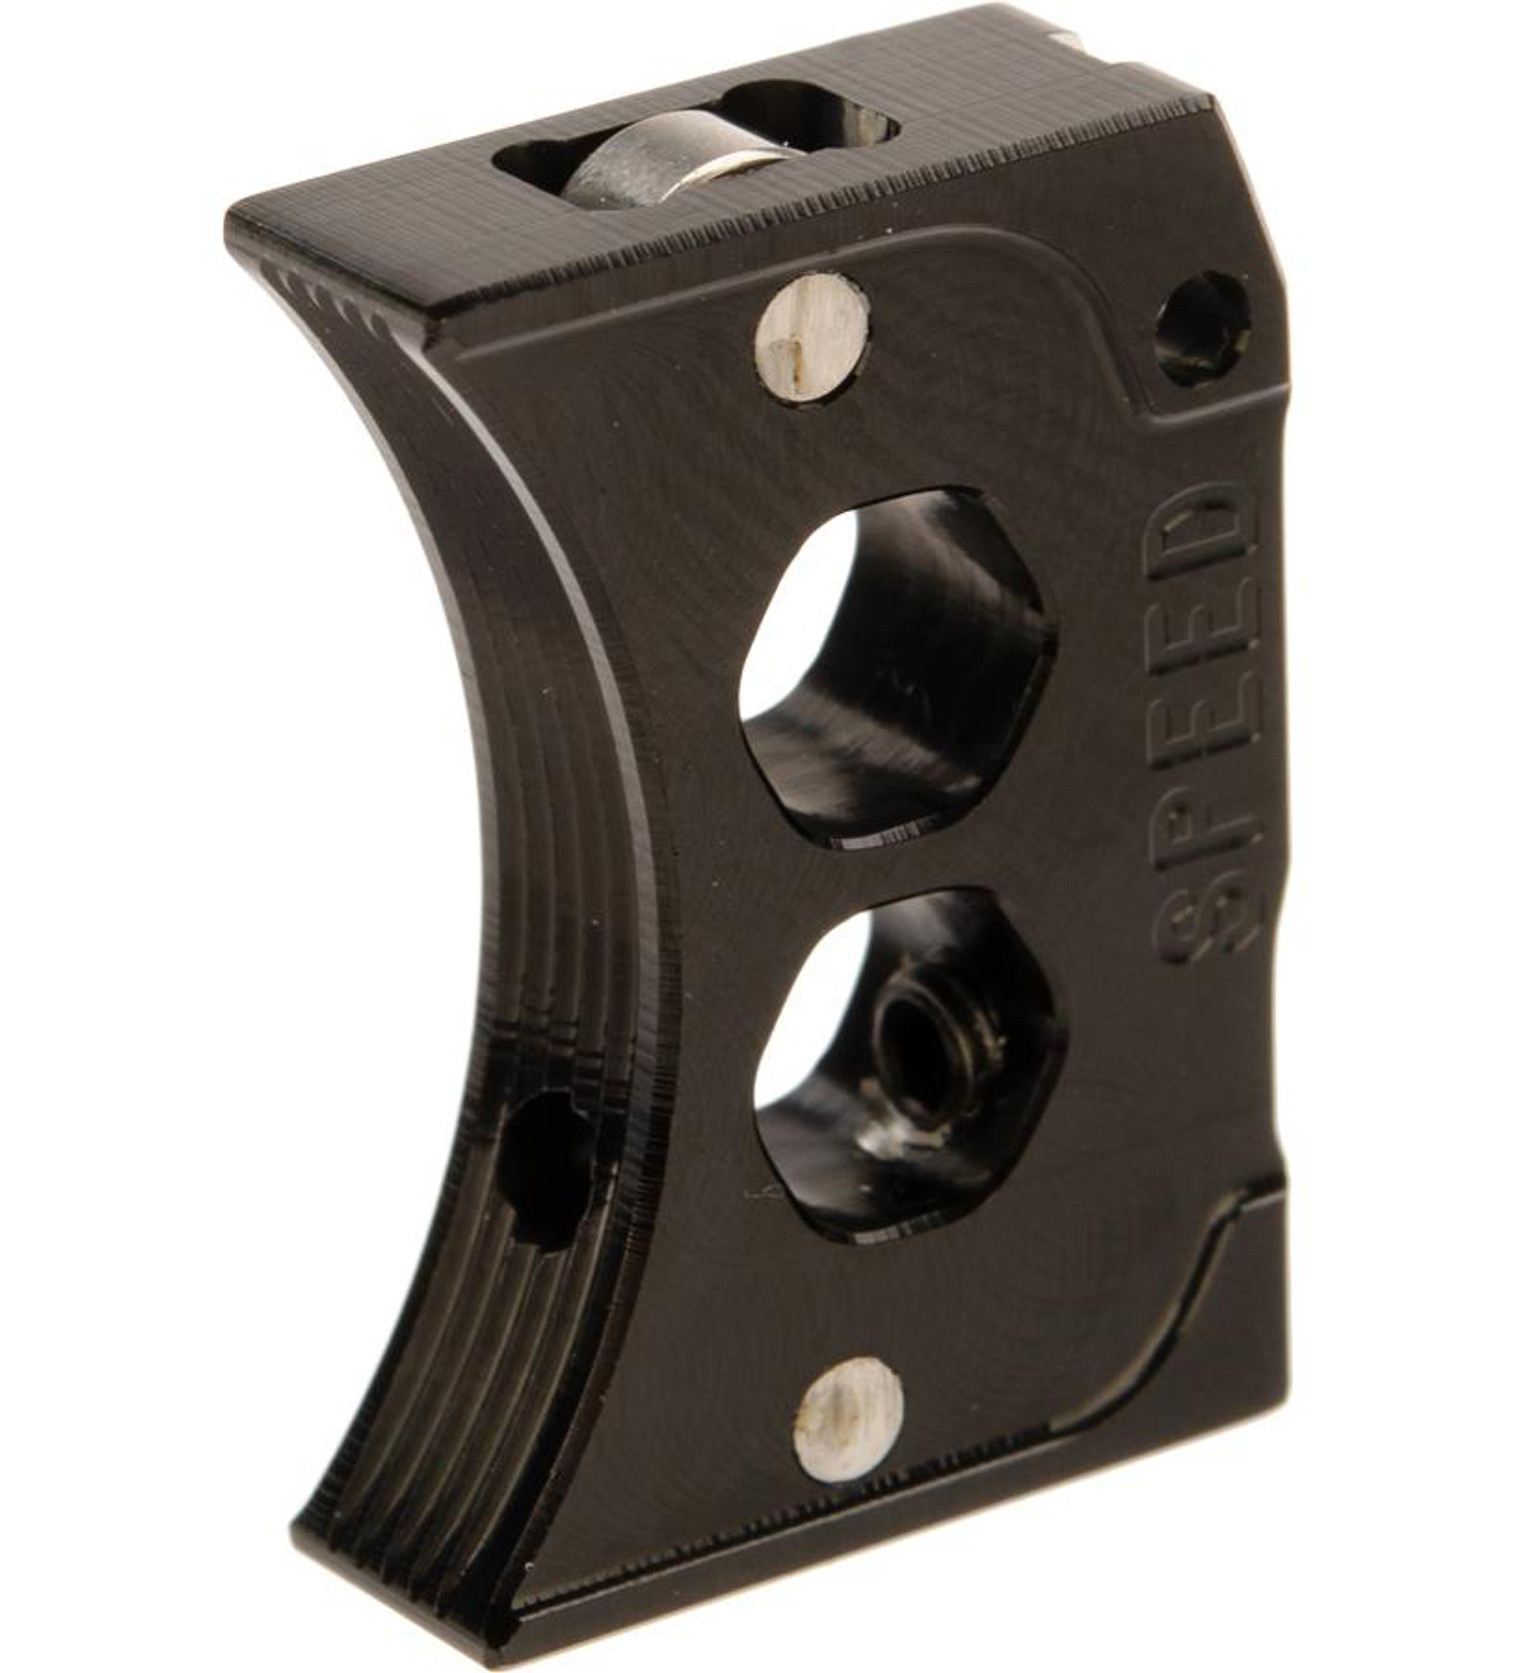 SPEED Ball Bearing Trigger for Tokyo Marui Hi-Capa/M1911 Airsoft Gas Blowback Pistols (Type: Curve Trigger / Hex Holes)